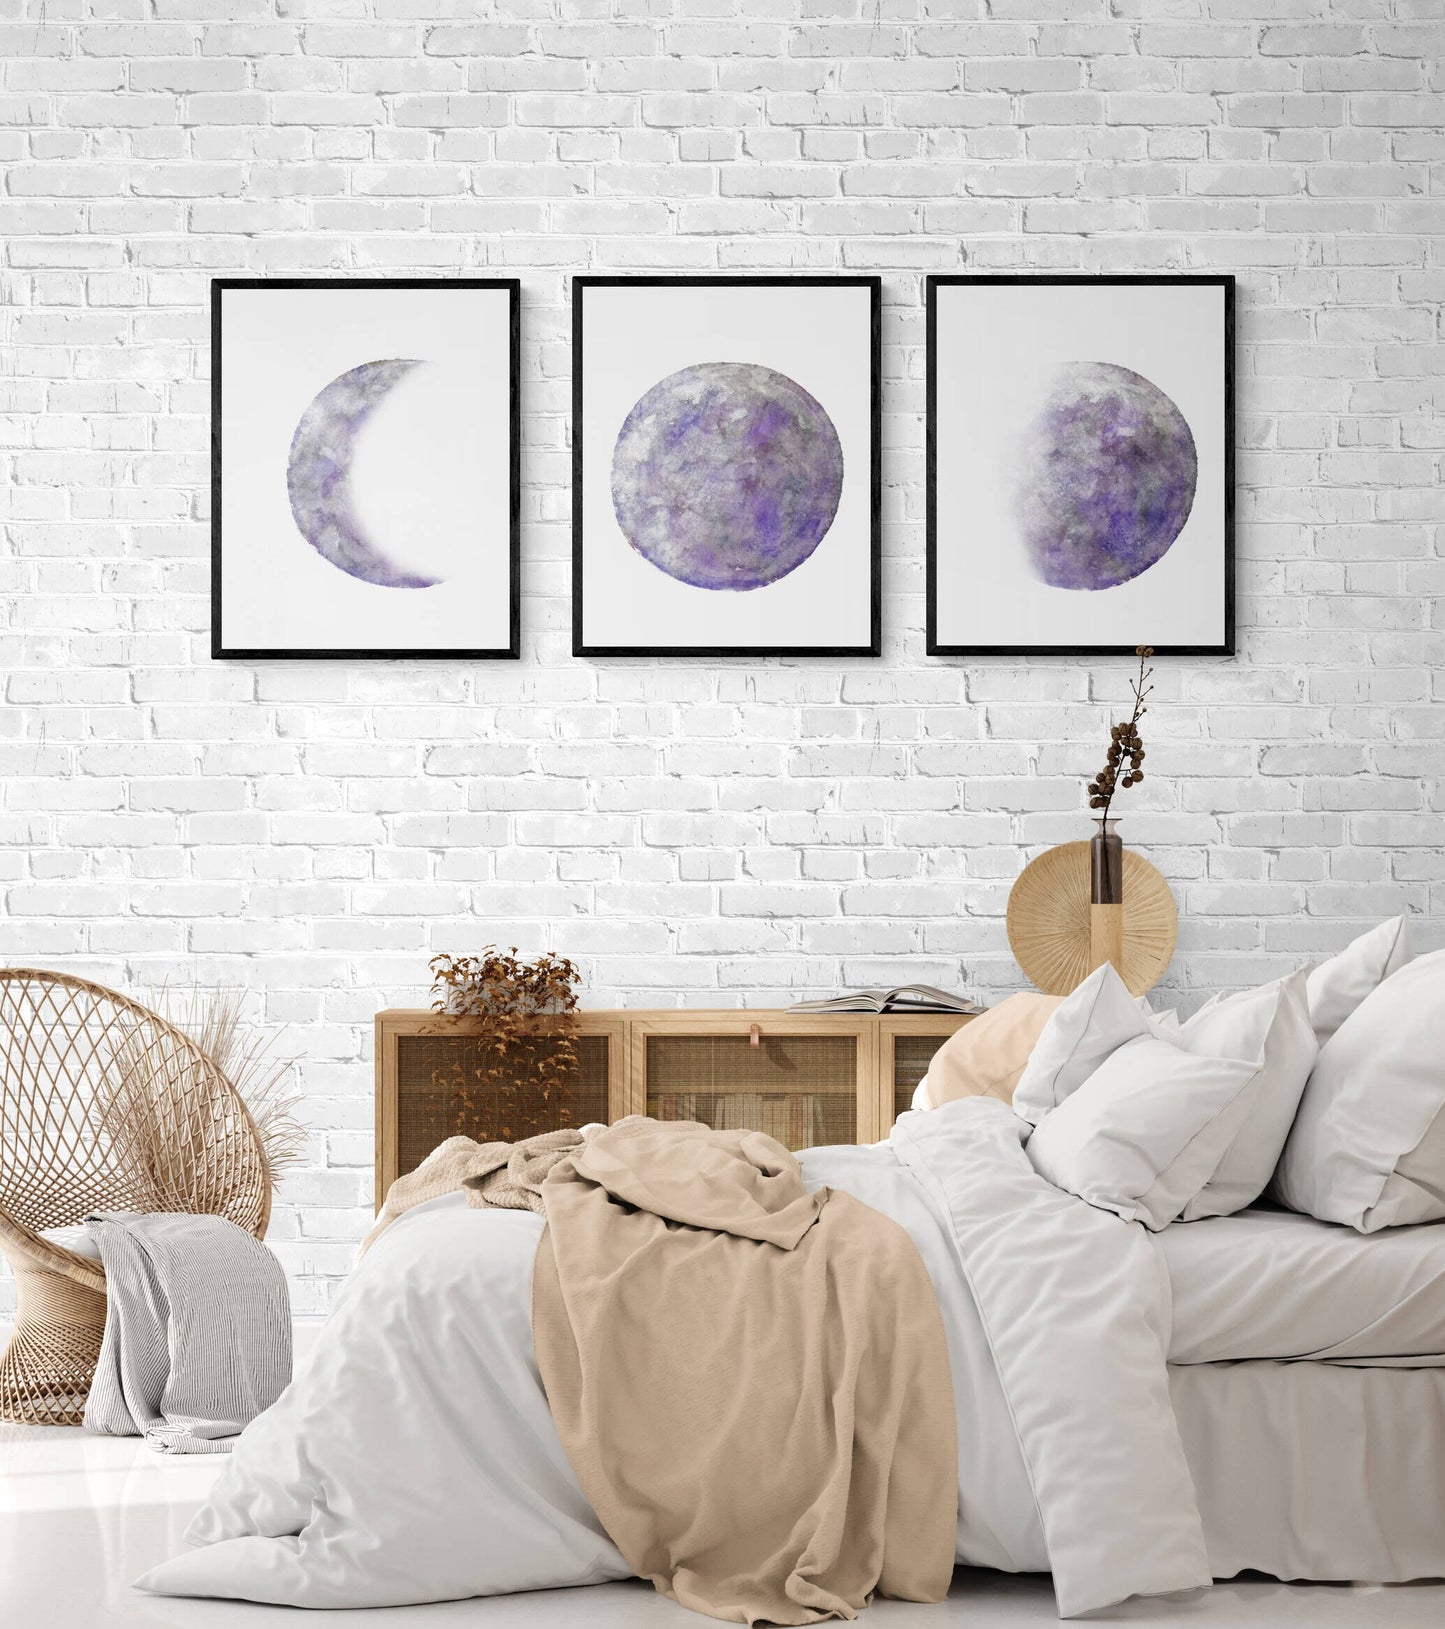 Moon Phases Set of 3 Prints, Purple Moon Poster, Galaxy Artwork, Home Wall Decor, Modern Art, Bedroom Wall Decor, Lunar phase, Space Art